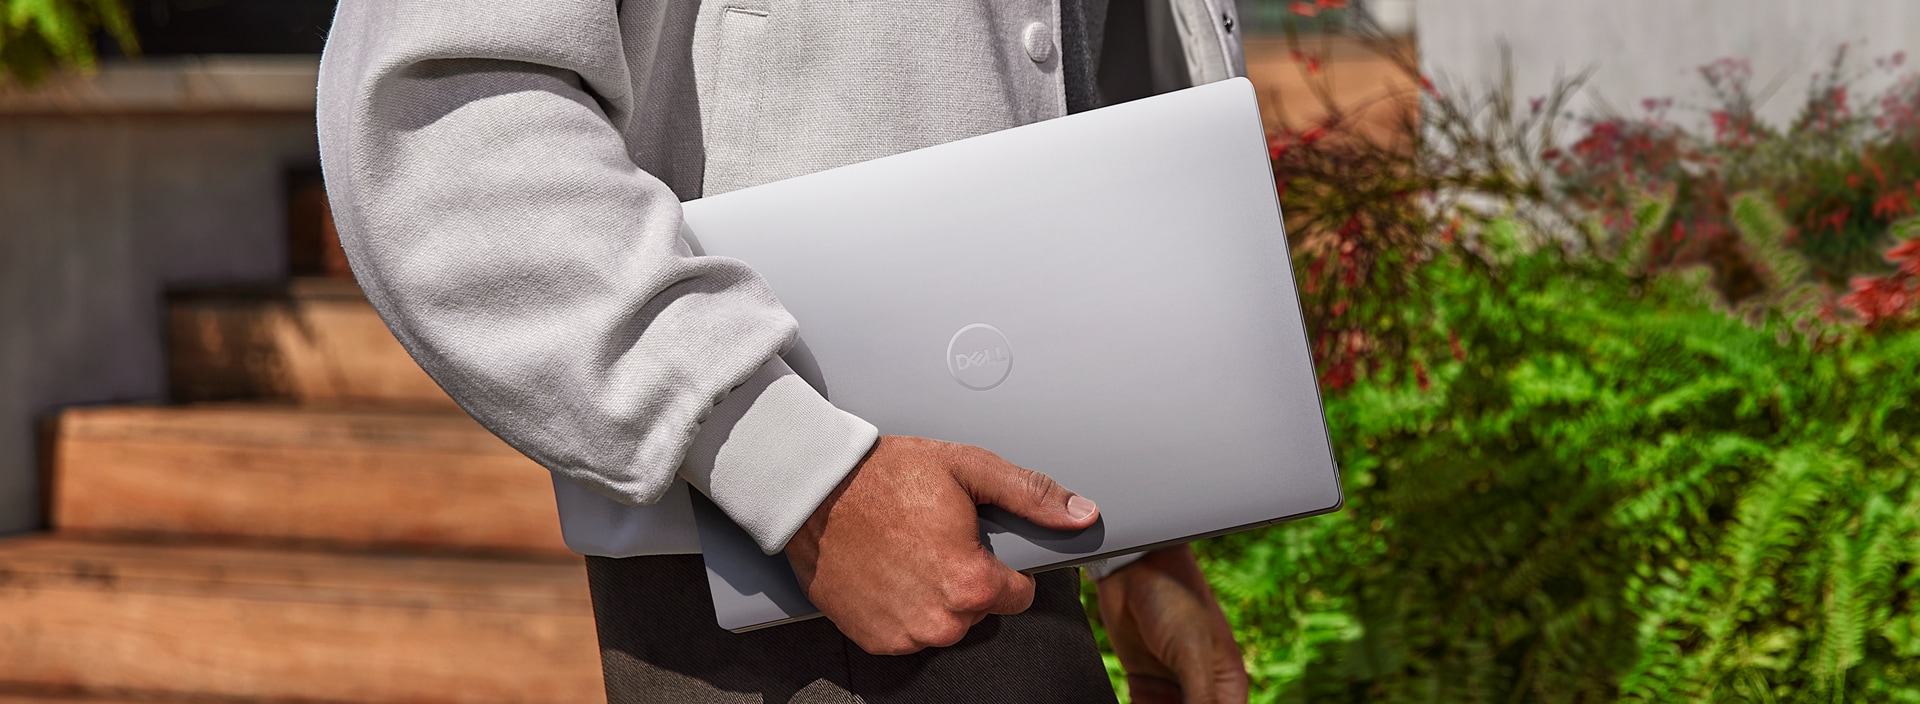 XPS 13 Laptop | Dell United States